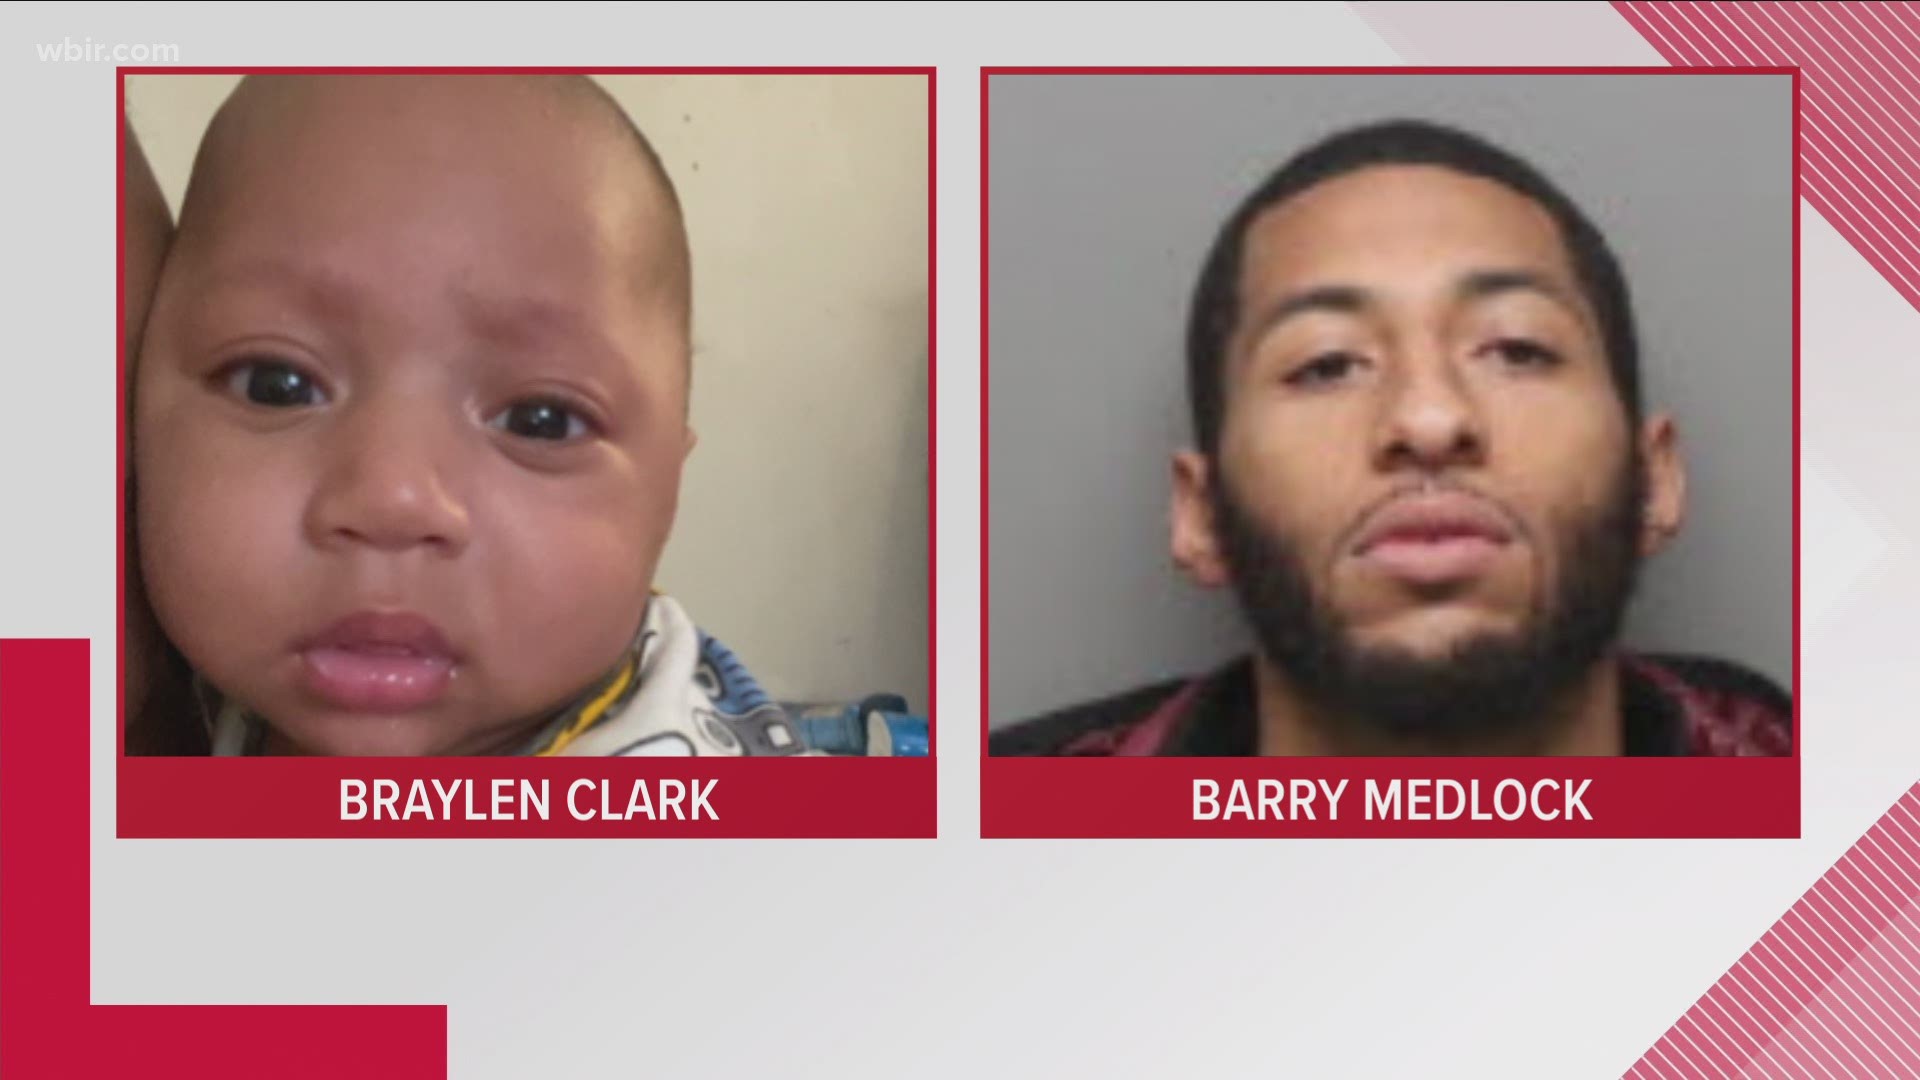 The TBI has issued an amber alert for a missing infant thought to be with his non-custodial father.